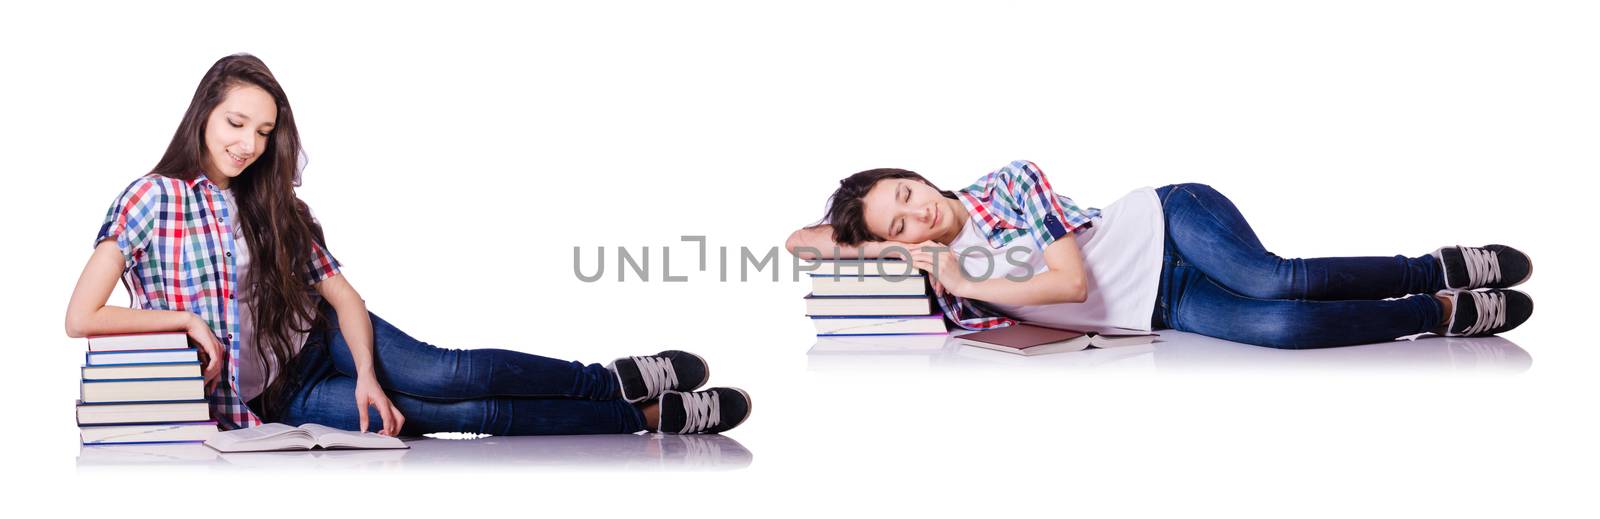 Student with books isolated on white by Elnur